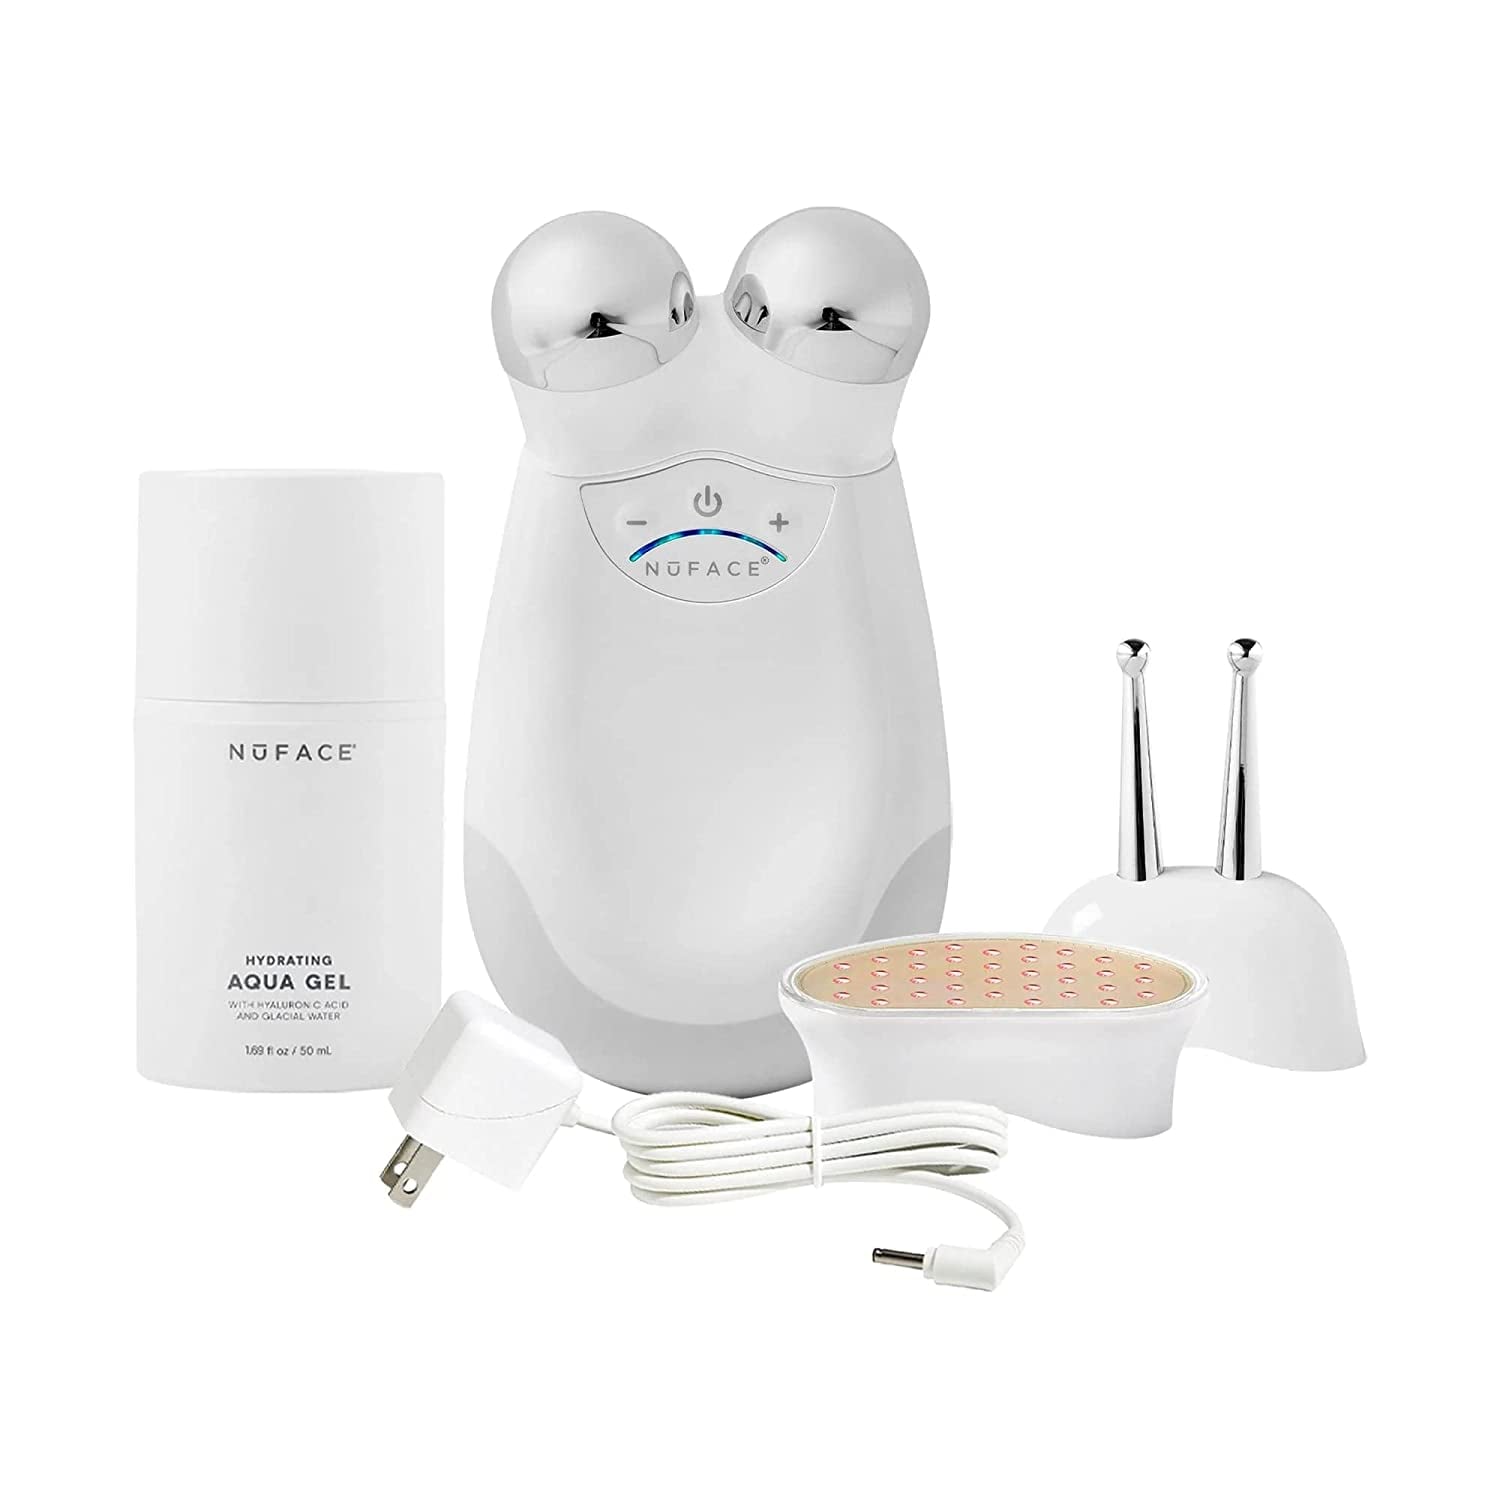 Best Prime Day Beauty Deal on a Microcurrent Facial Device